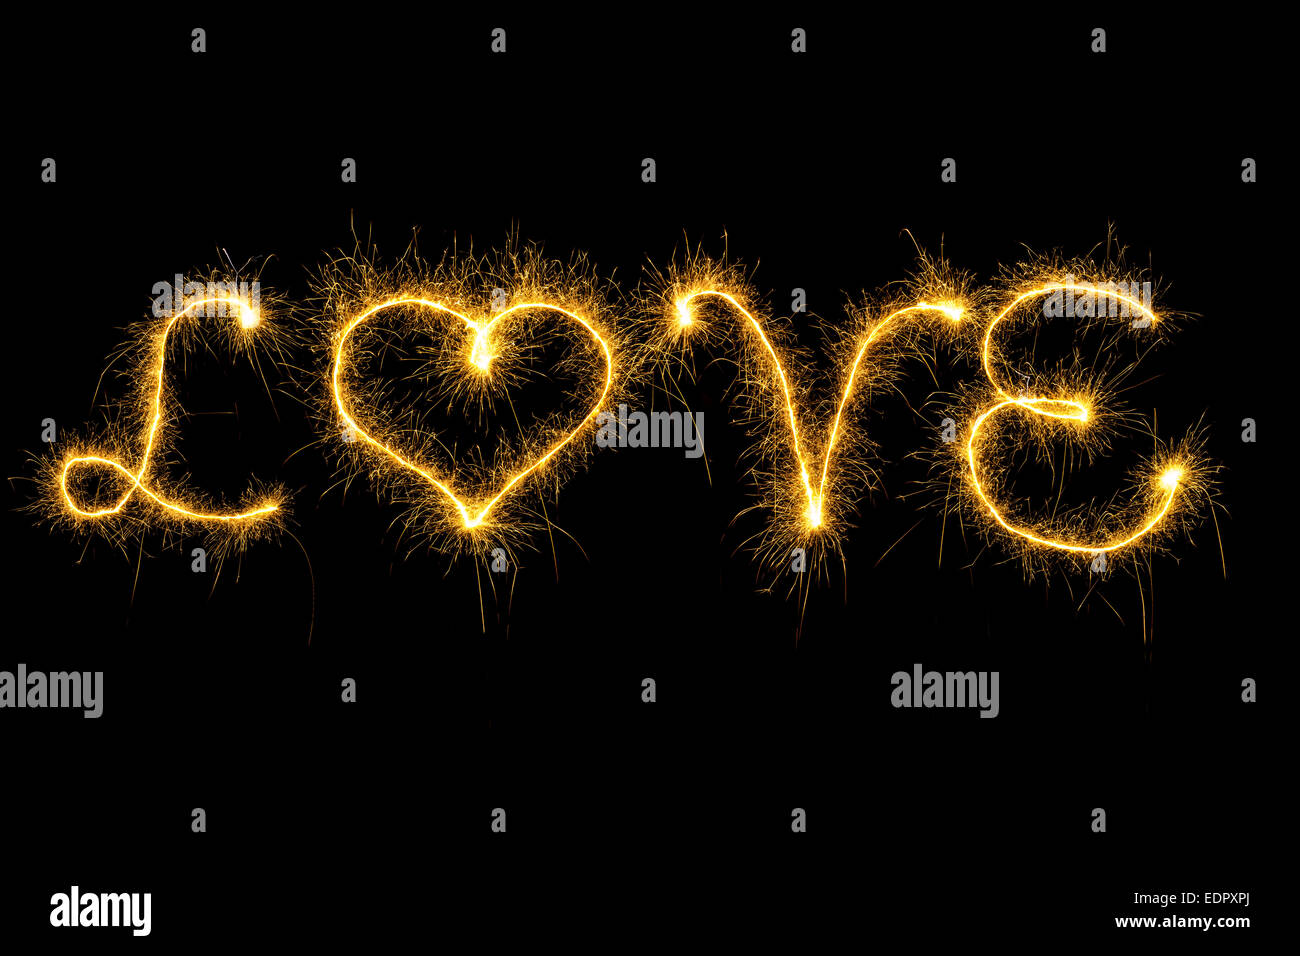 Sparking love word on black background Stock Photo